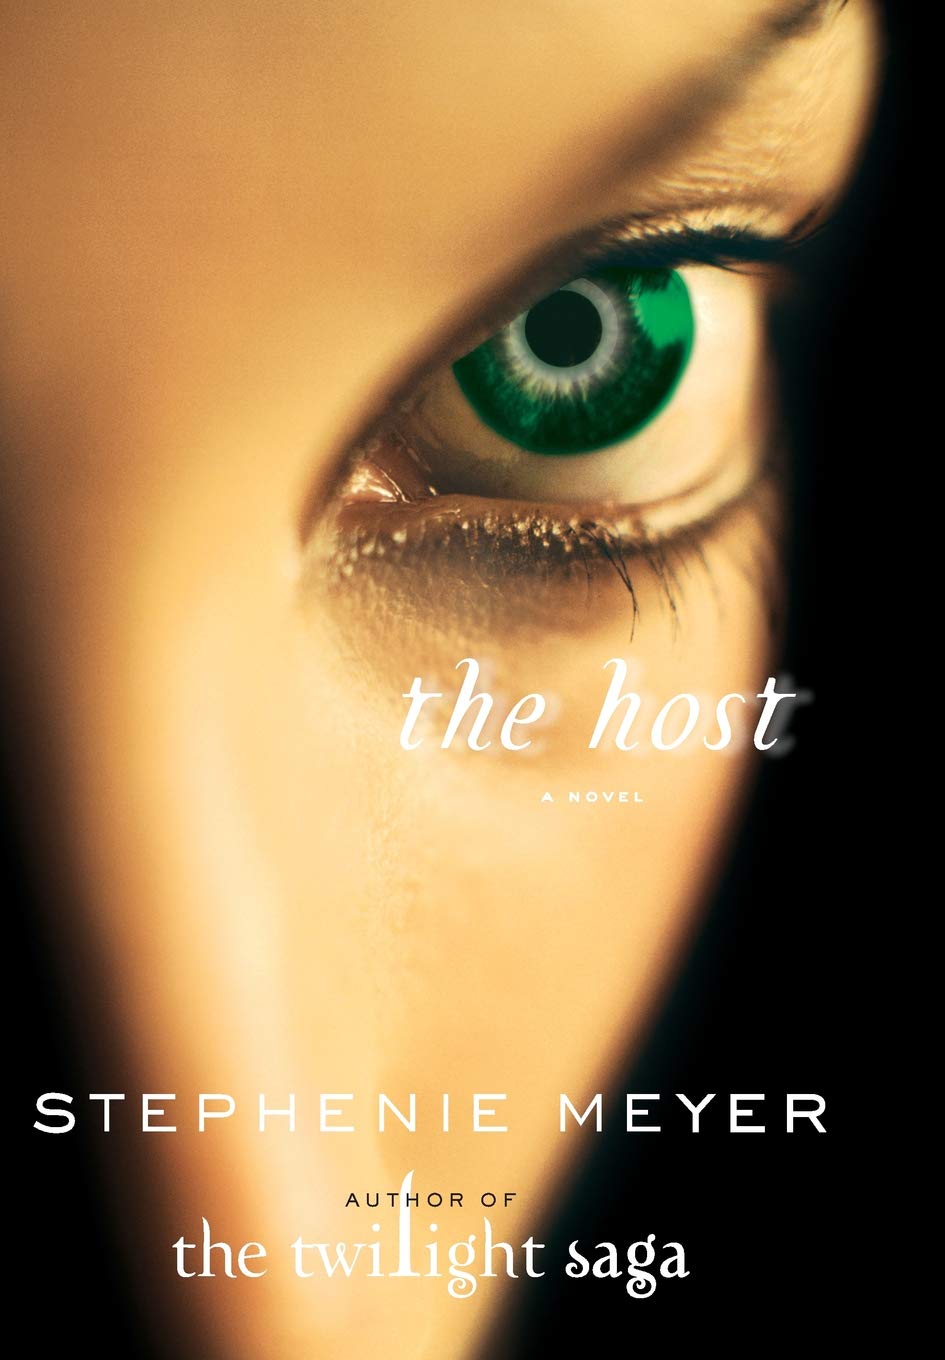 A cover of The Host